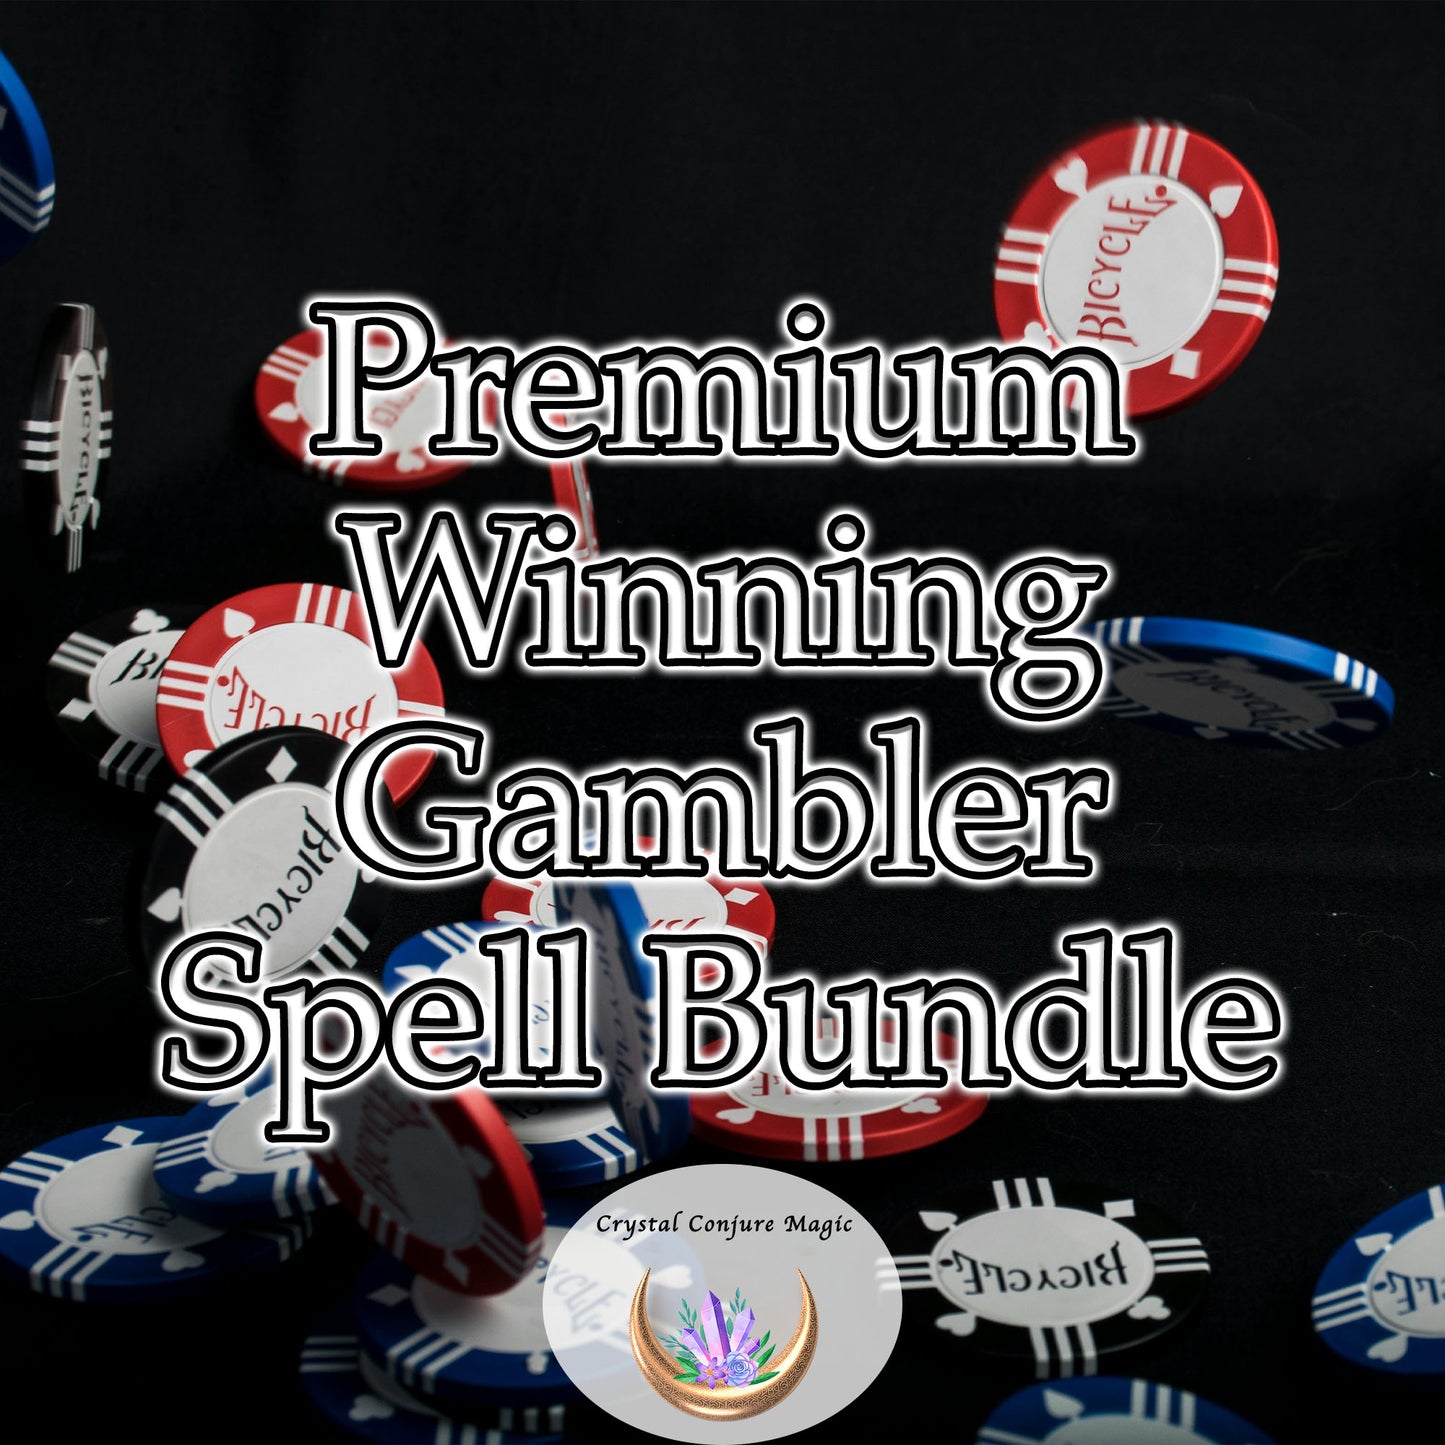 Premium Winning Gambler Spell Bundle - unleash the winning gambler within, and watch as your fortunes transform